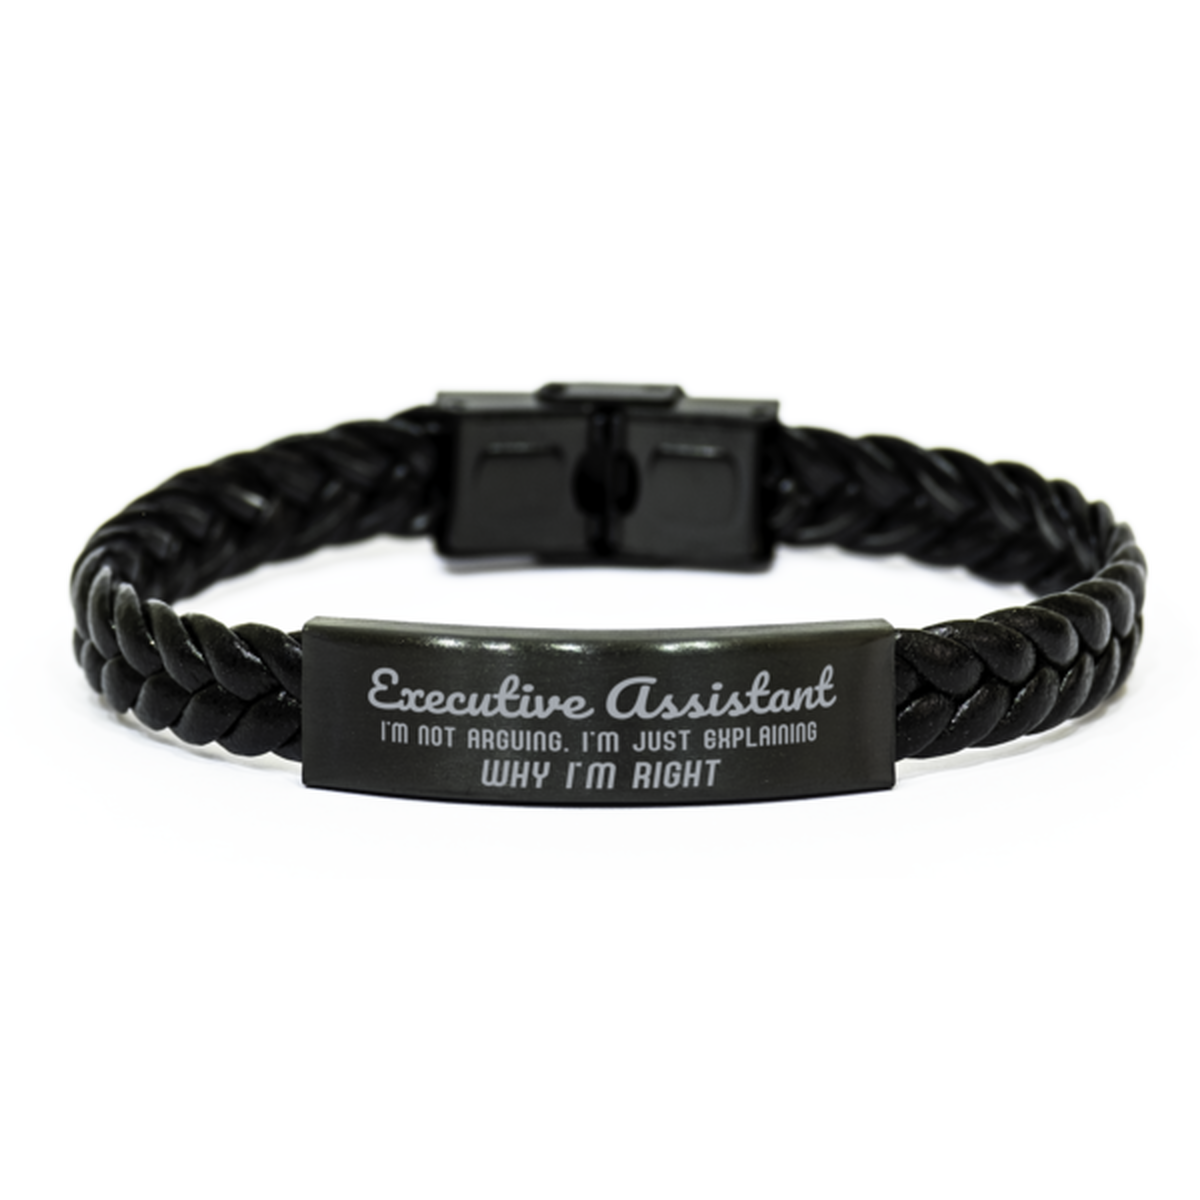 Executive Assistant I'm not Arguing. I'm Just Explaining Why I'm RIGHT Braided Leather Bracelet, Graduation Birthday Christmas Executive Assistant Gifts For Executive Assistant Funny Saying Quote Present for Men Women Coworker